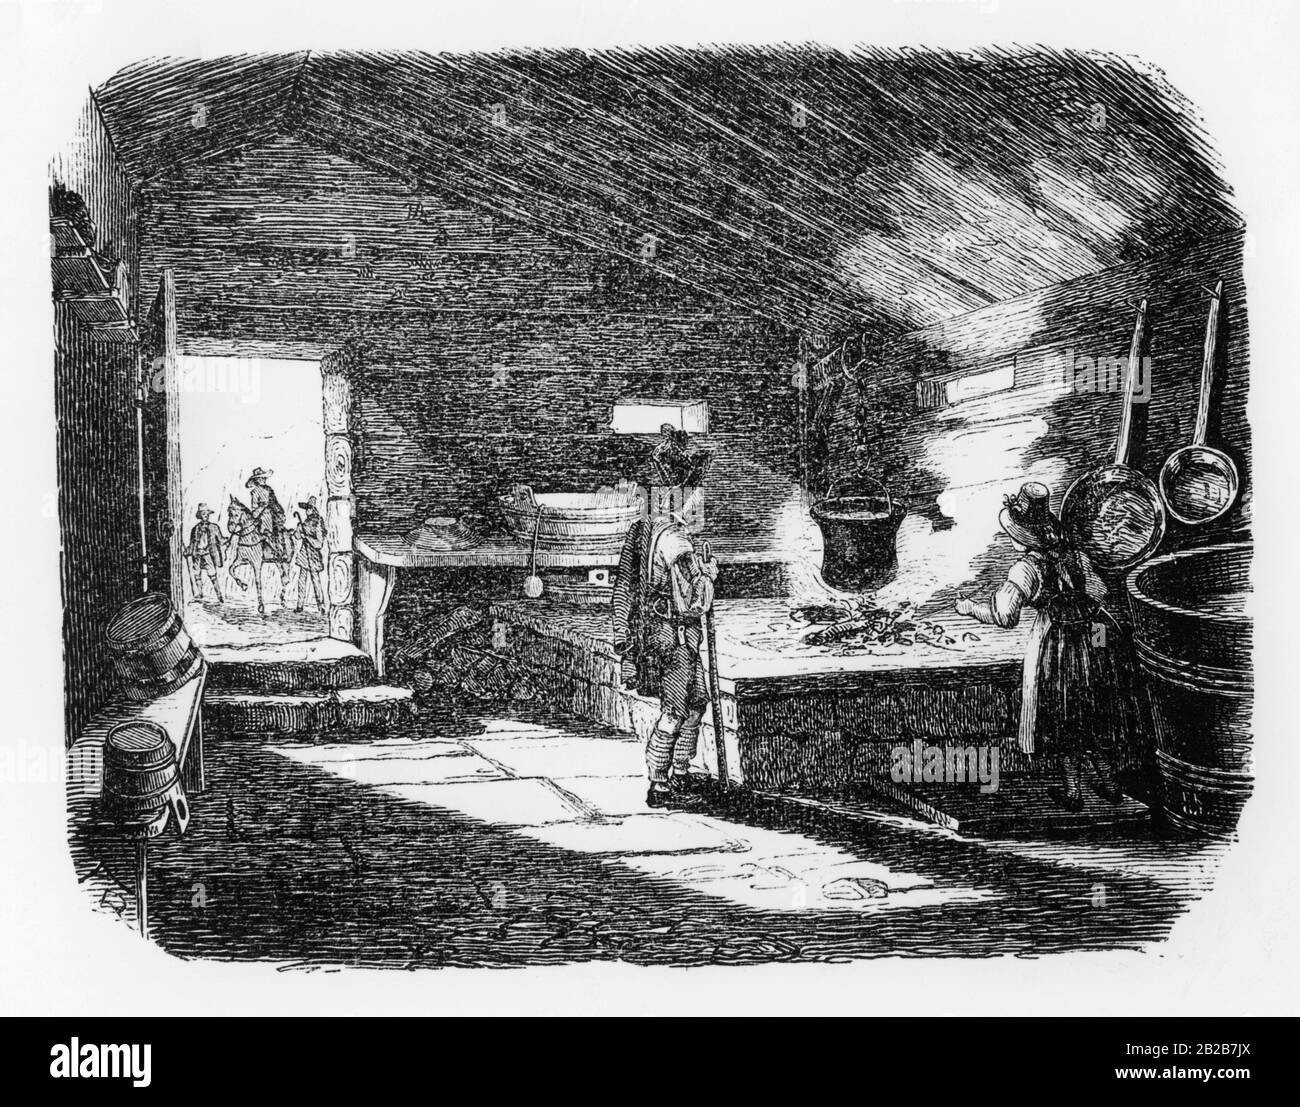 A kitchen in a 19th century chalet. Based on a drawing from 1847. The dairymaid is cooking in the cabin, while hikers and a rider are approaching from outside. Stock Photo